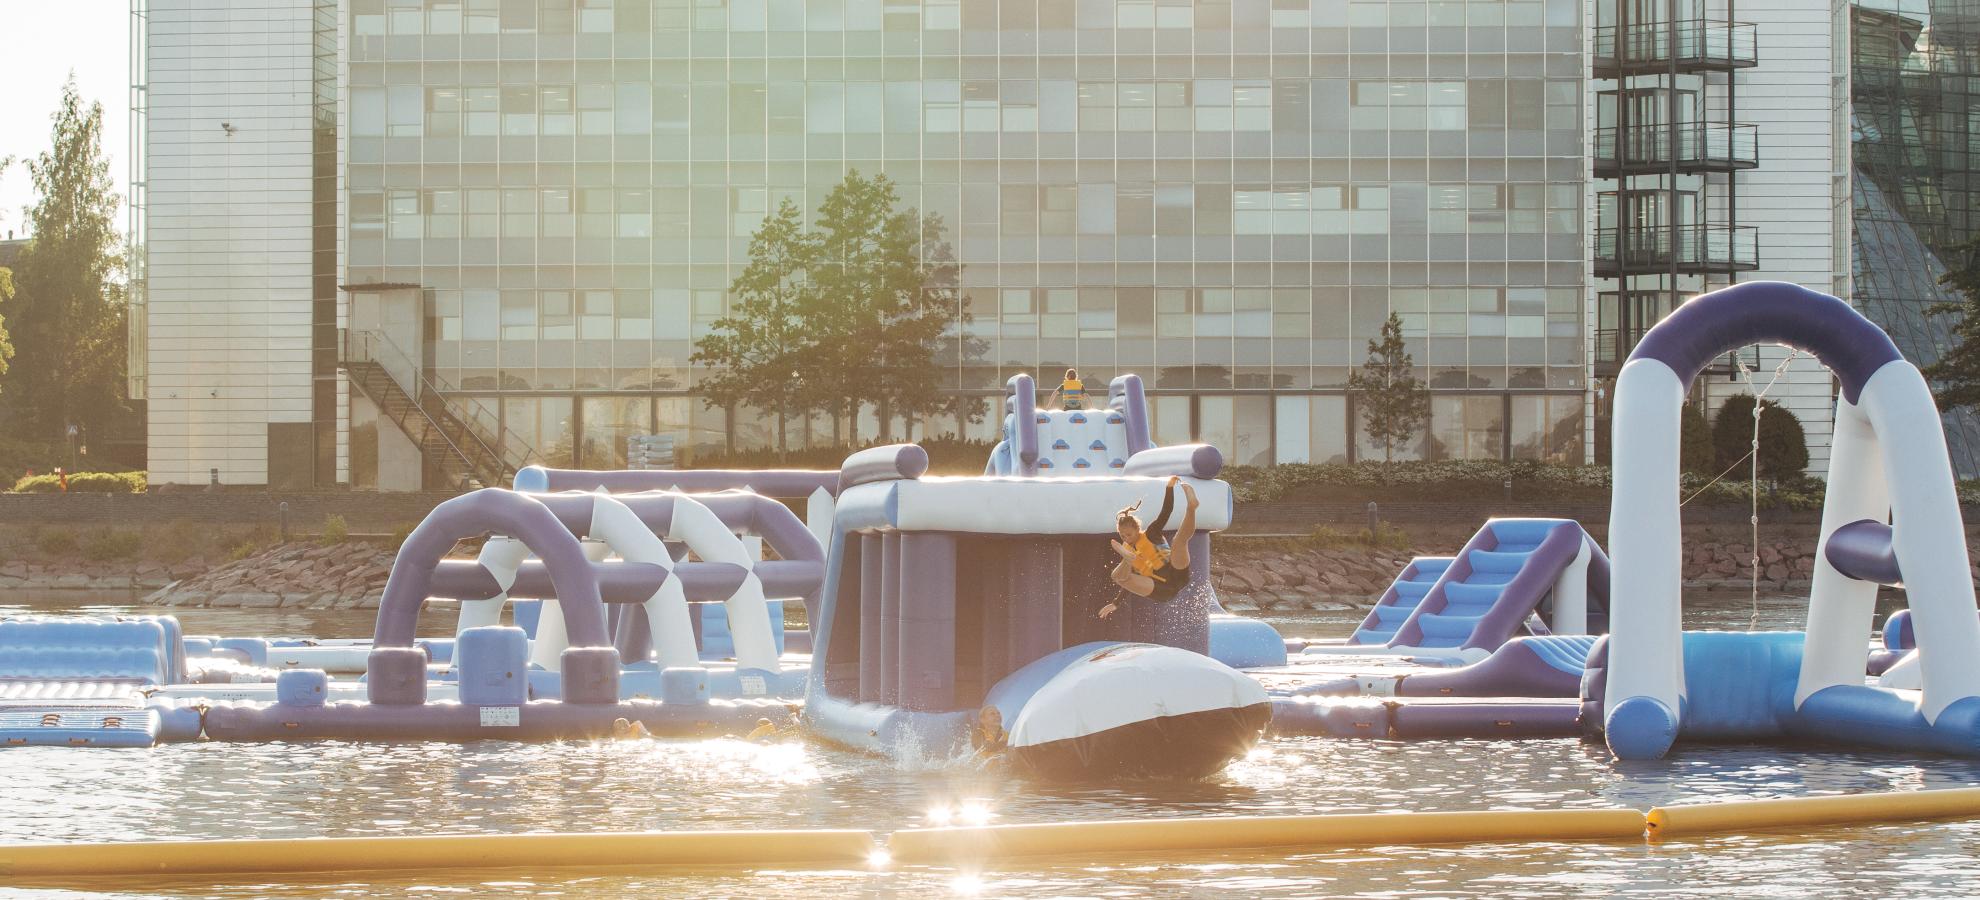 The floating water park at Water Sports Center Lagoon.